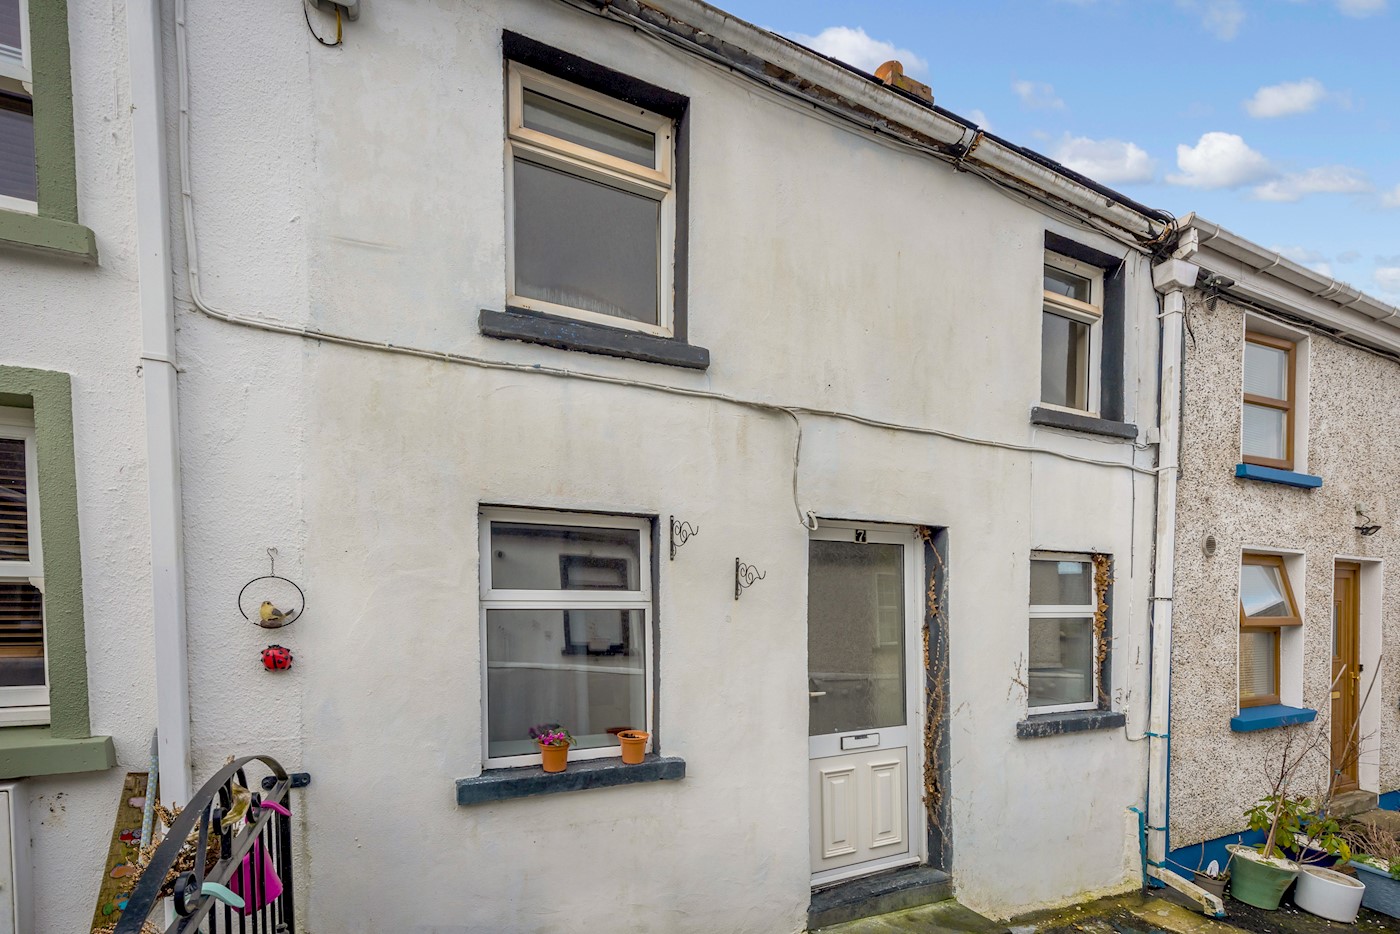 7 Queens Terrace, Barker Street, Waterford City, Co. Waterford, X91 PN7T 1/12